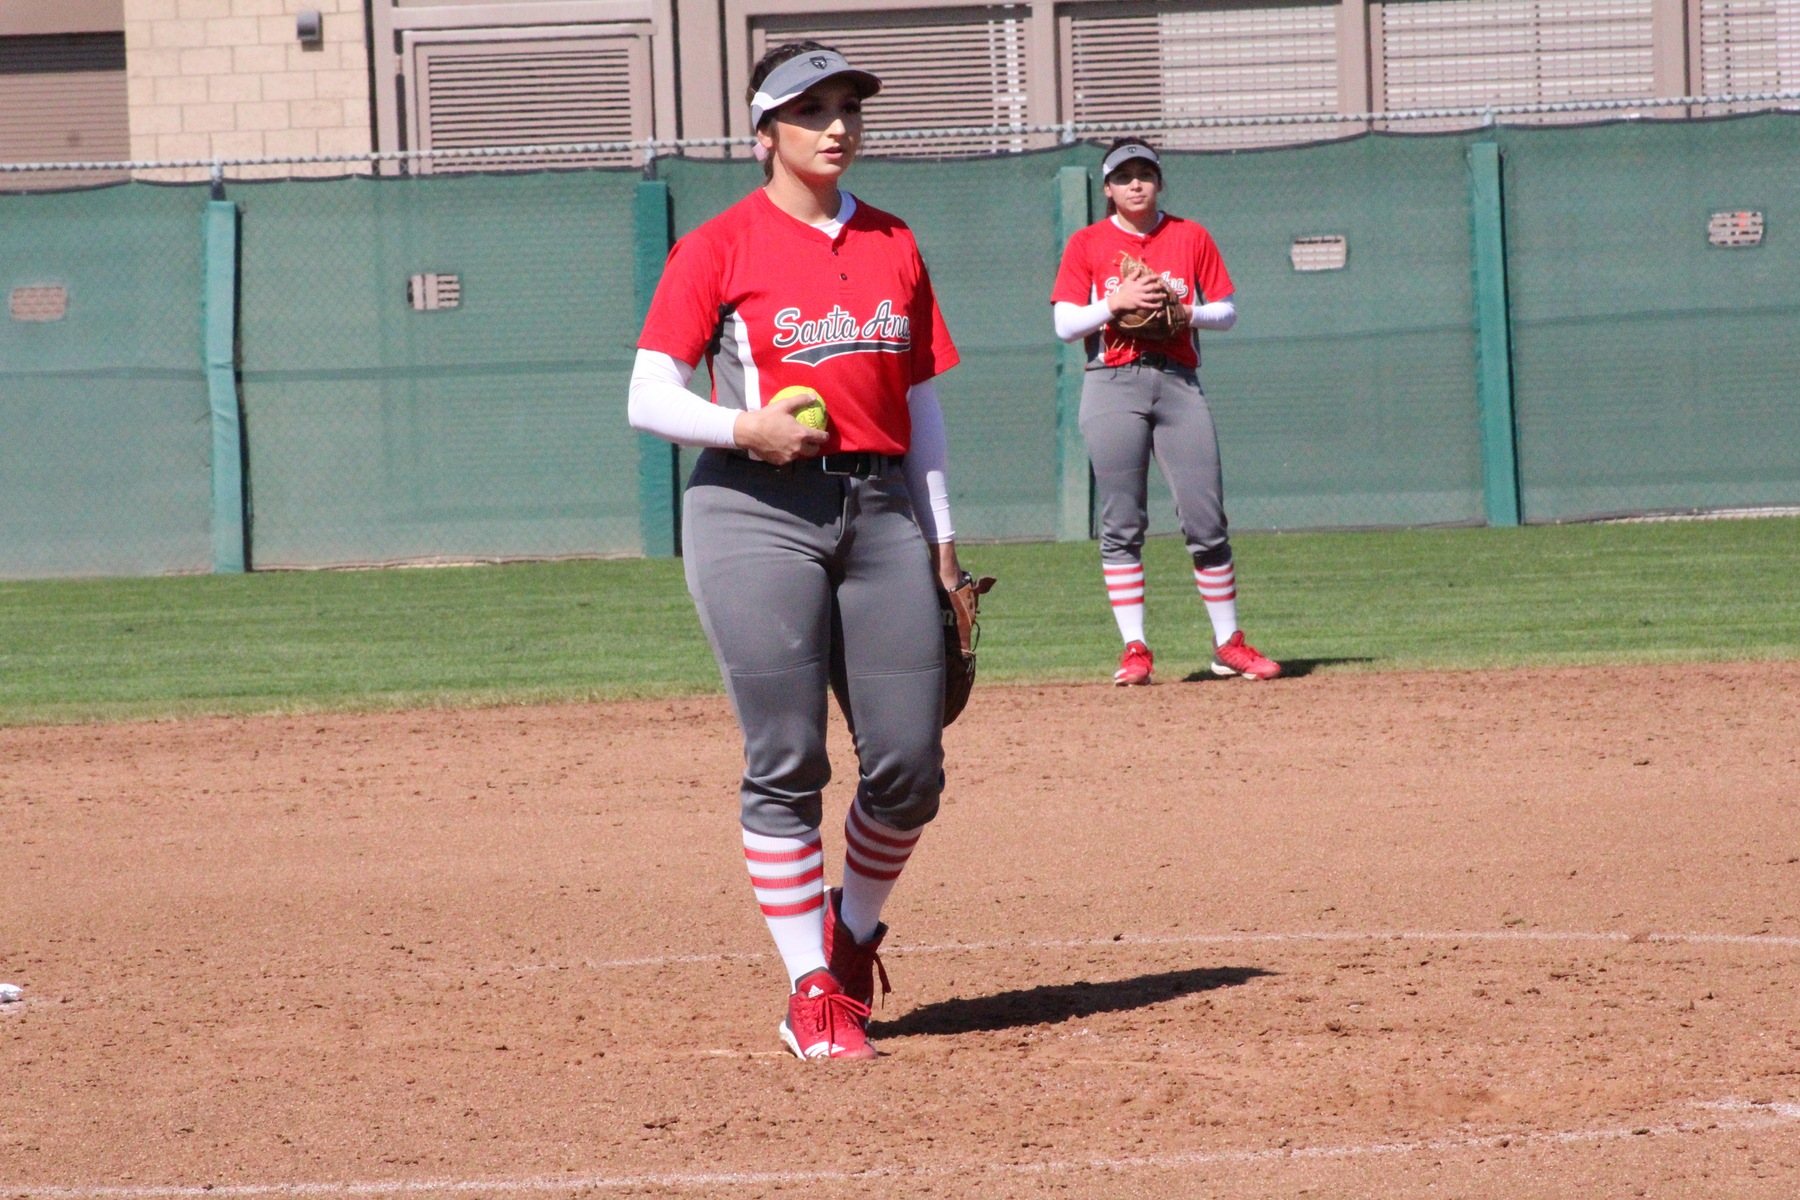 Dons Fall in Pitchers Duel with Southwestern